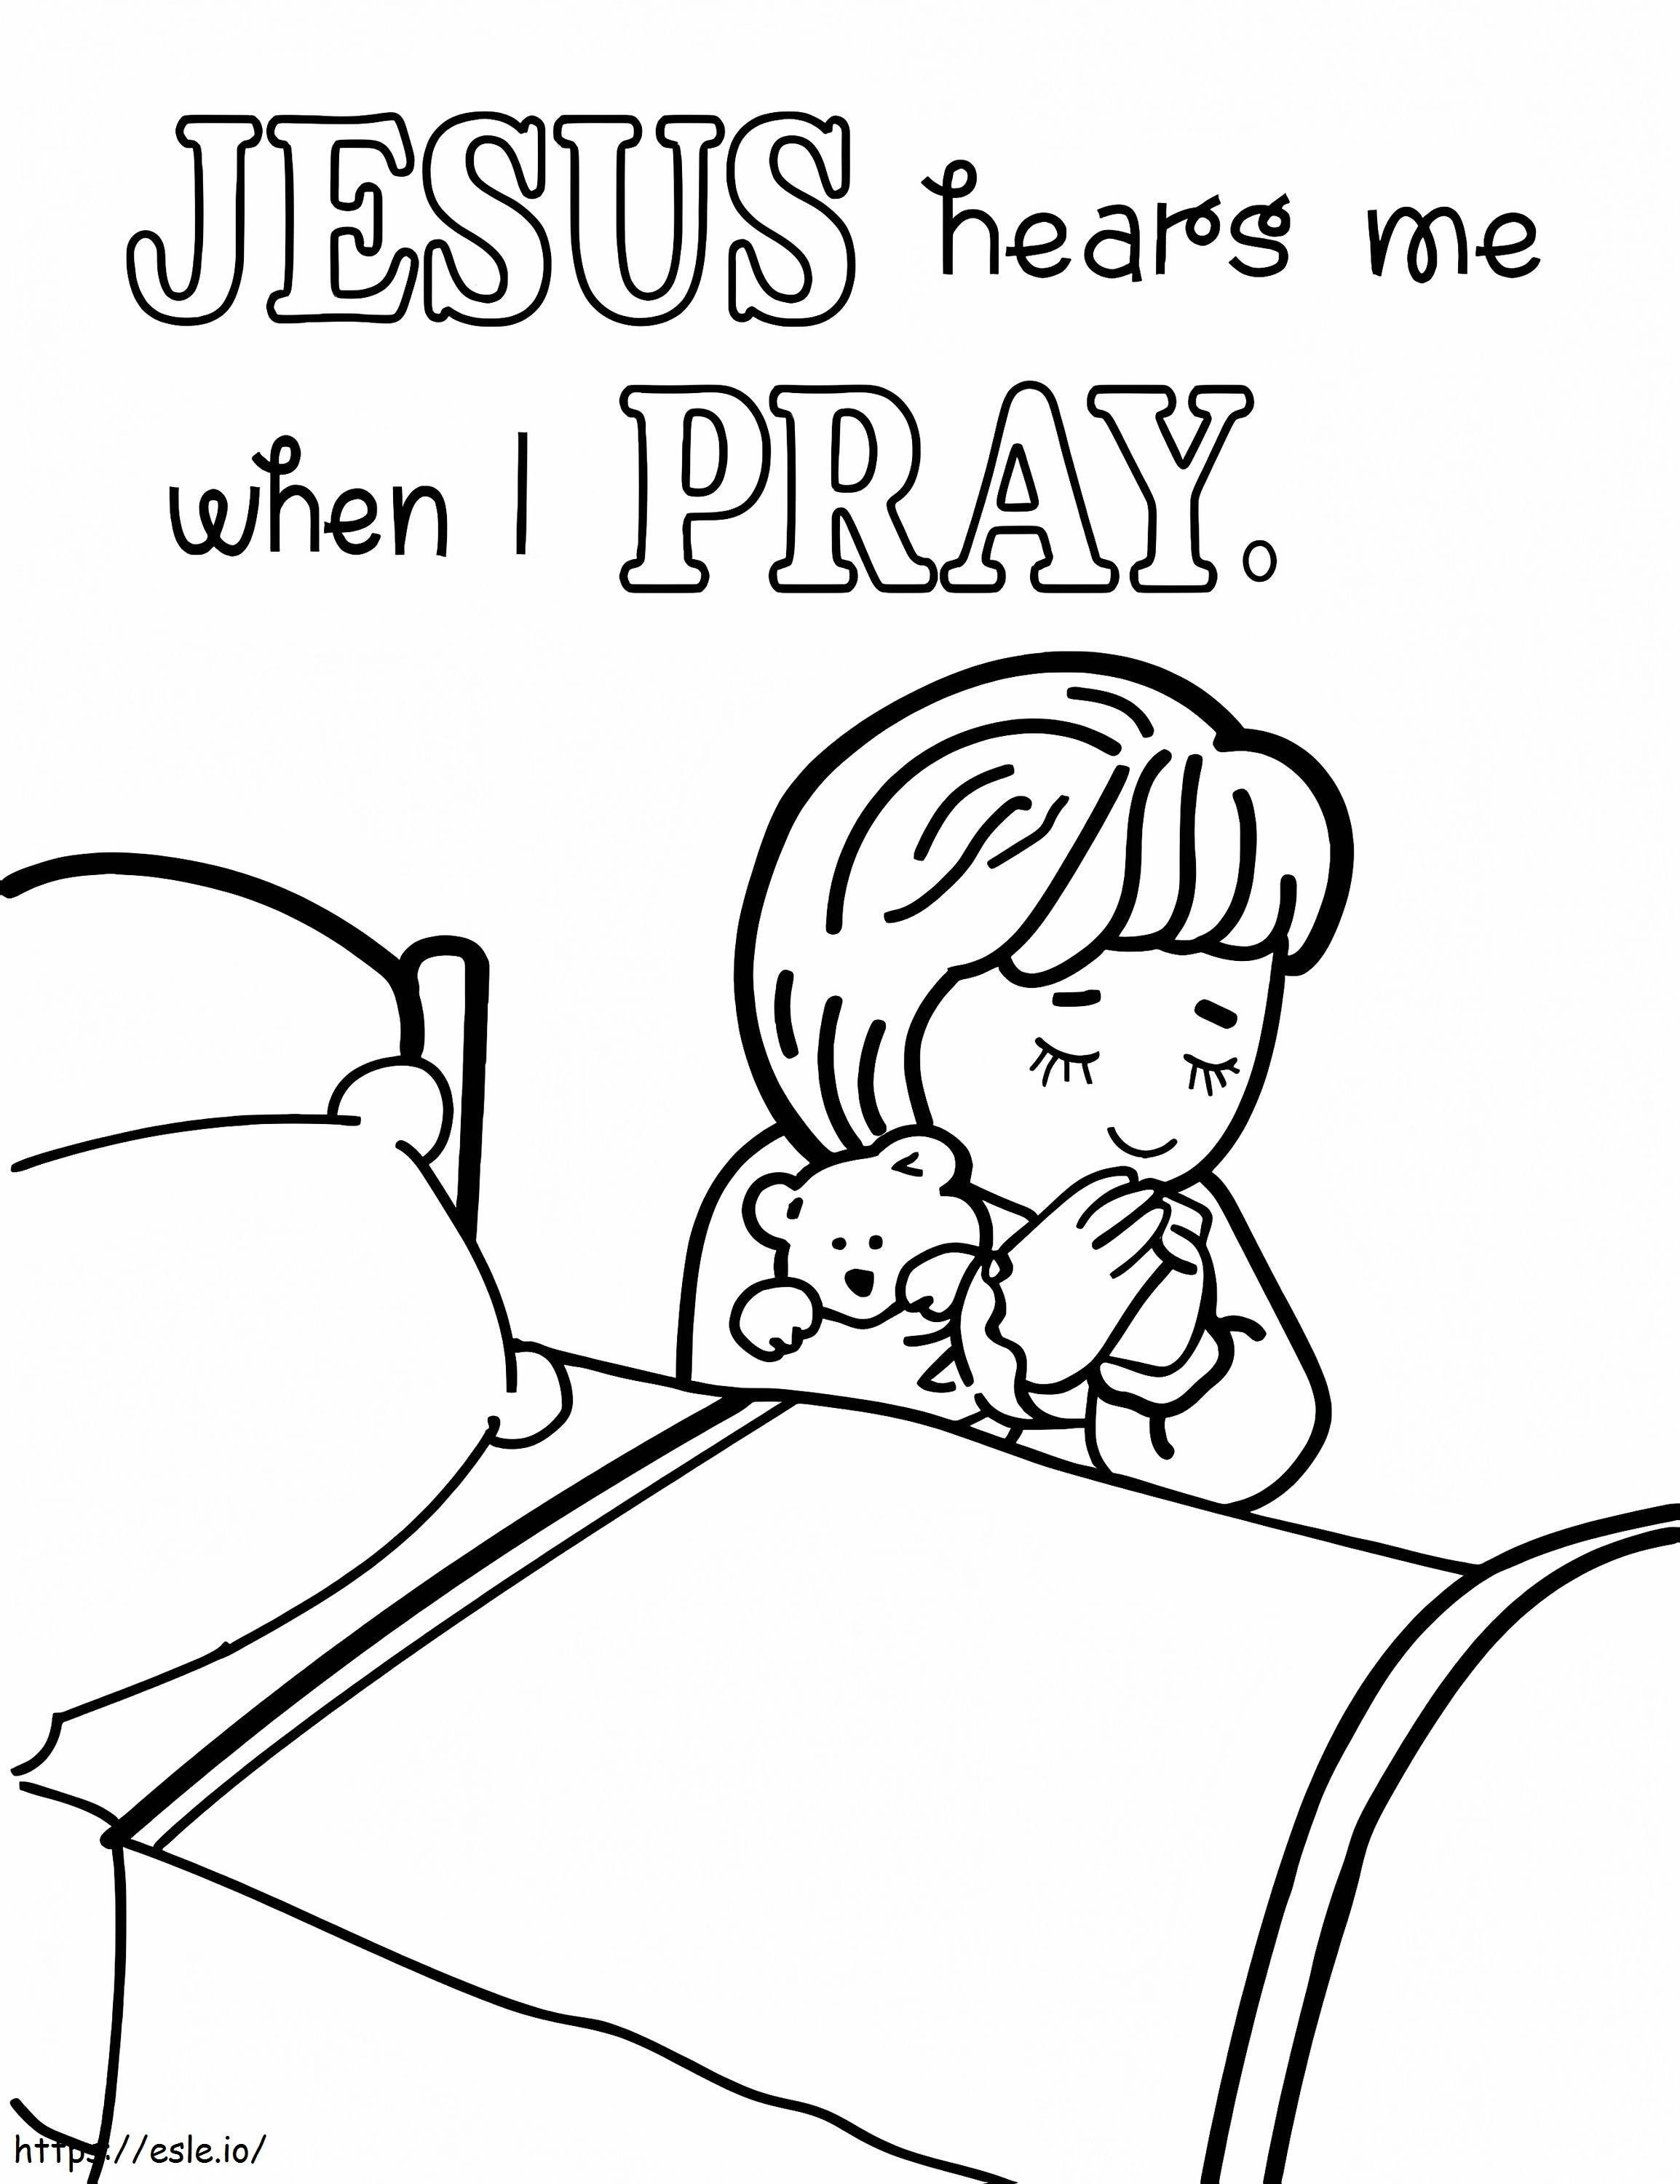 Jesus Hears Me When I Pray coloring page